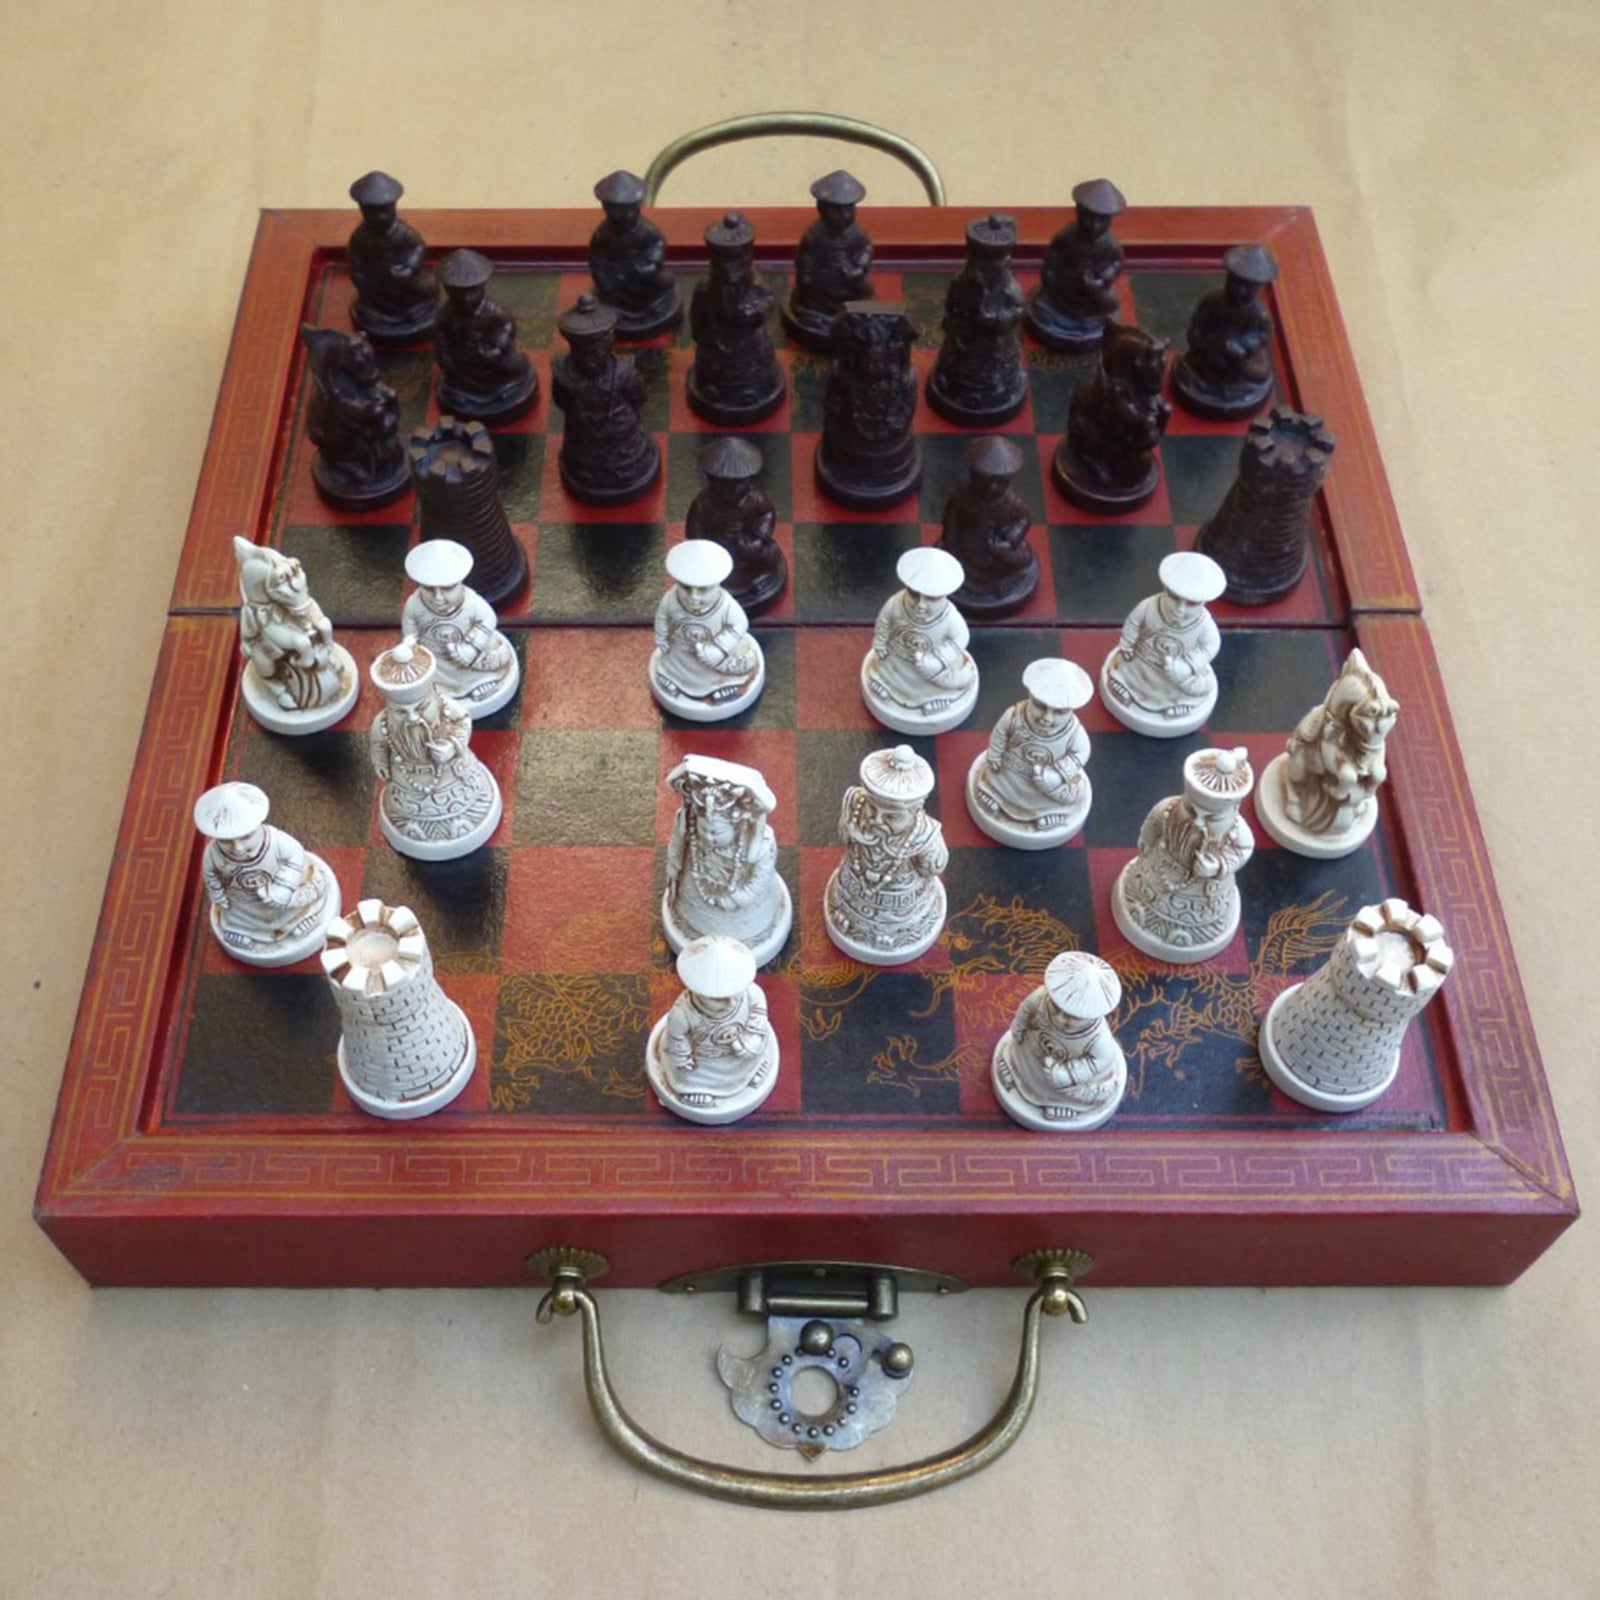 New 28x28cm Standard Game Vintage Wooden Chess Set Foldable Board Great Gift